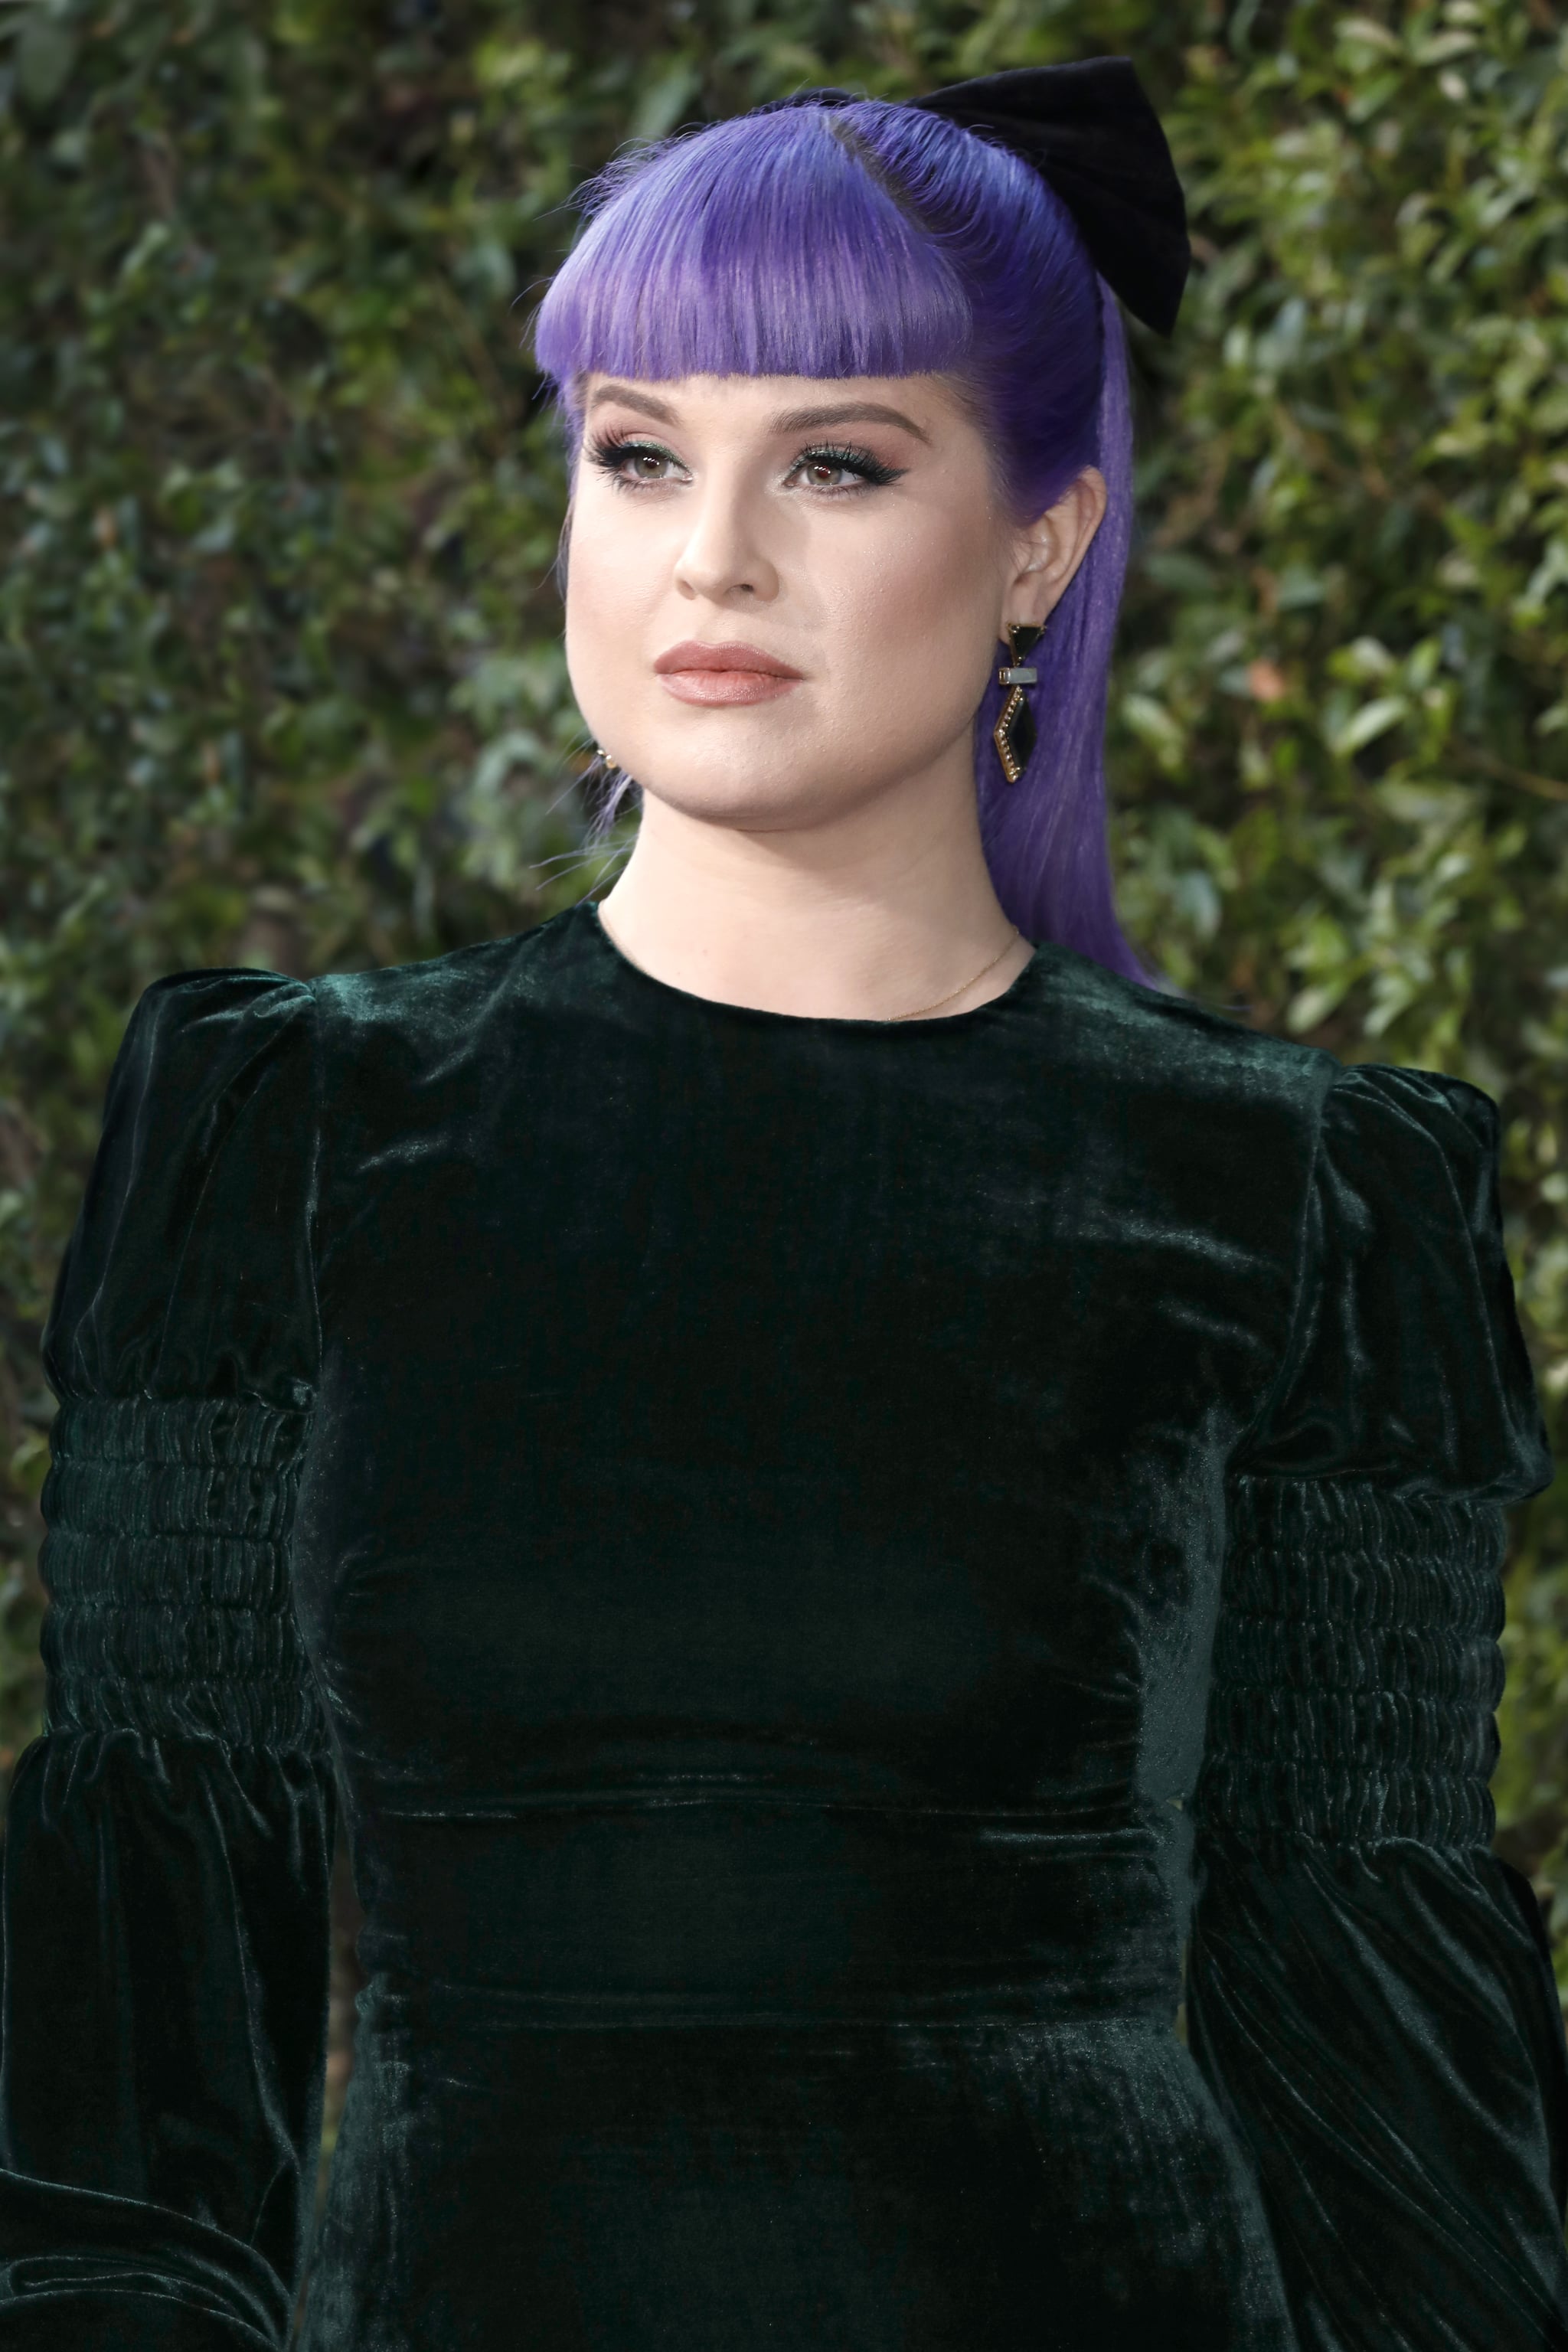 Kelly Osbourne Gets Tattoo in Honor of Joan Rivers -- See Her New Ink!